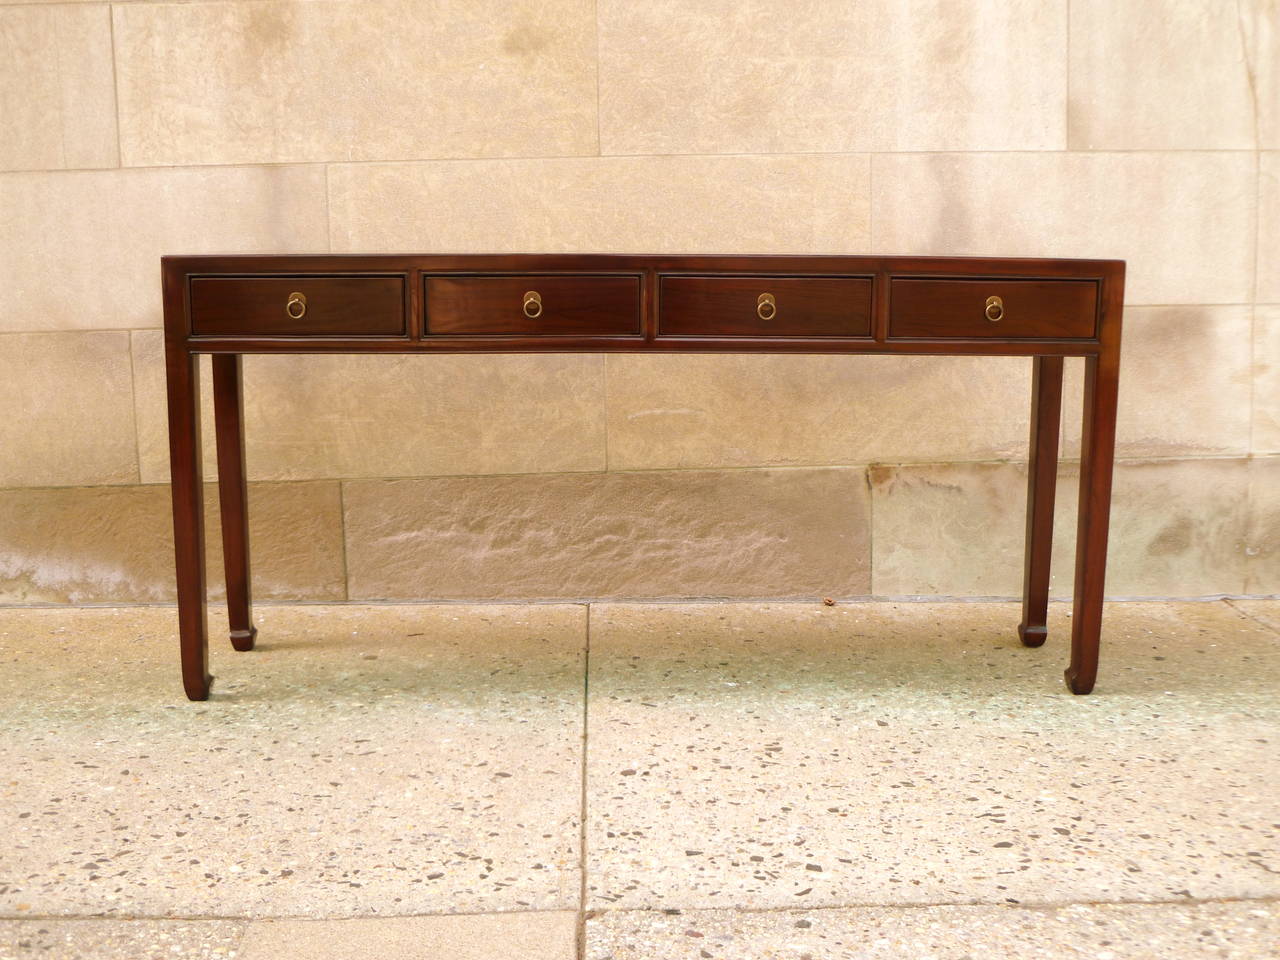 Chinese Fine Ju Mu Wood Console Table with Four Drawers